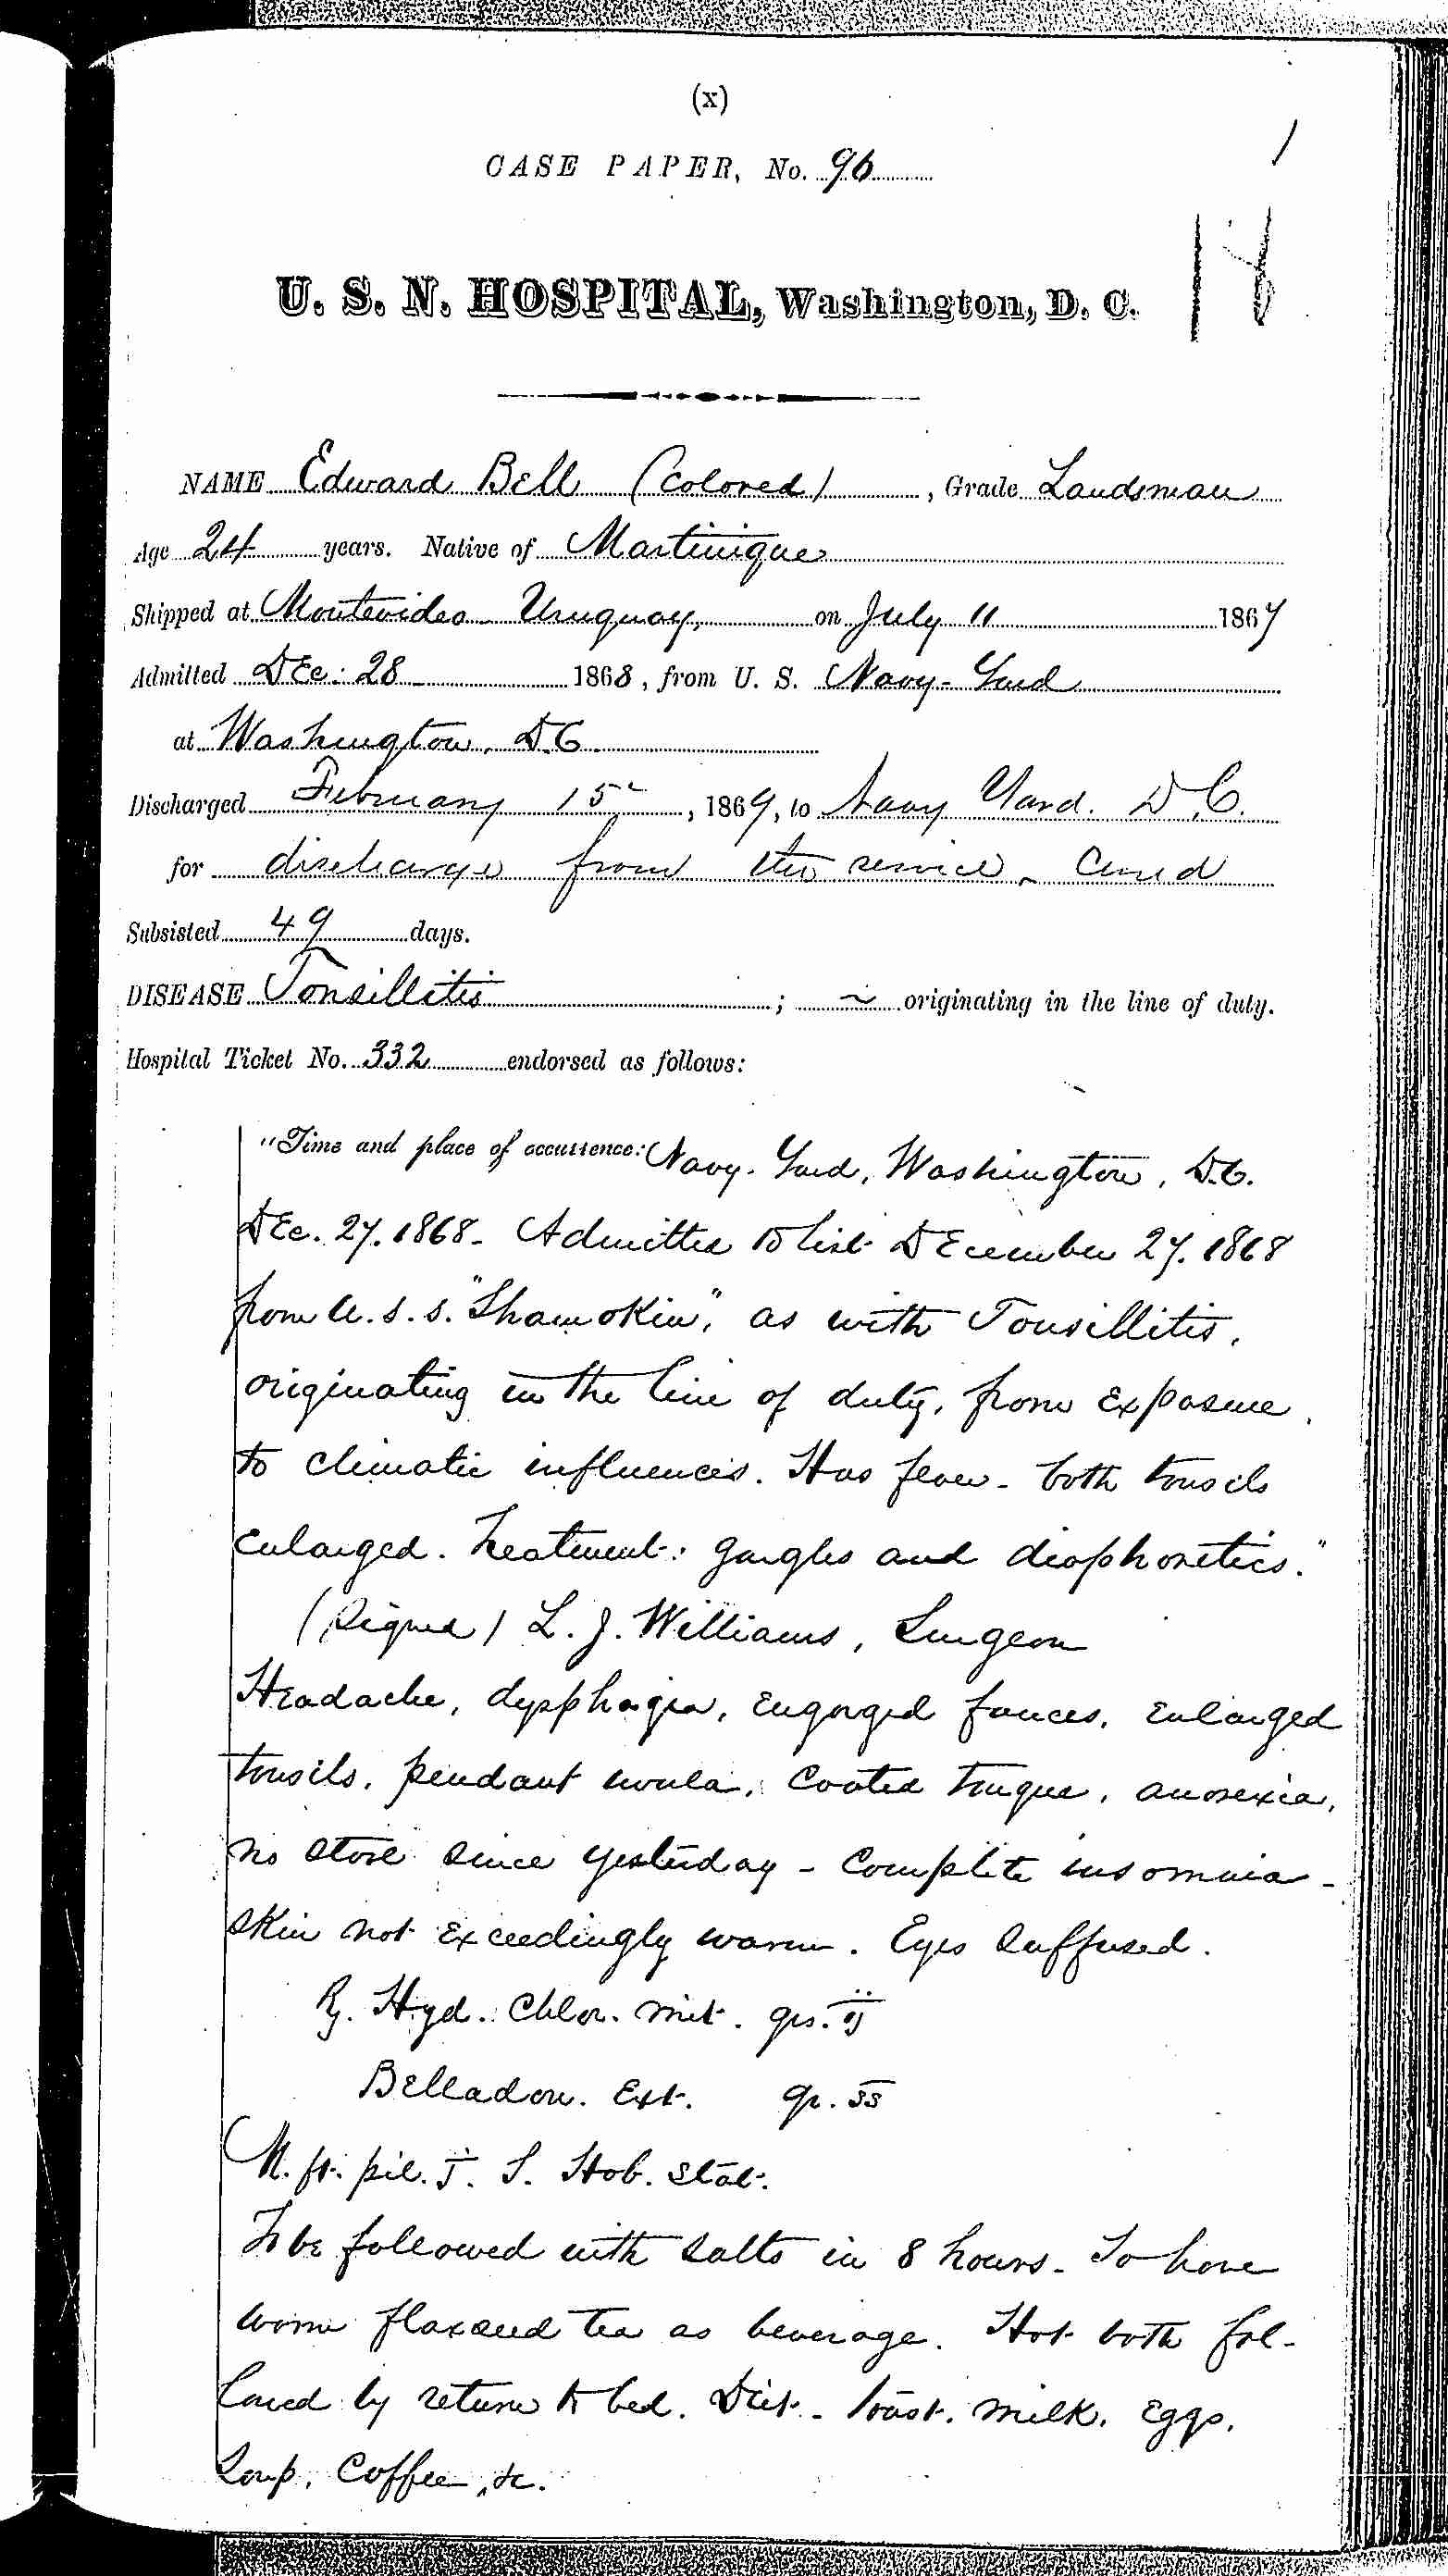 Entry for Edward Bell (page 1 of 5) in the log Hospital Tickets and Case Papers - Naval Hospital - Washington, D.C. - 1868-69